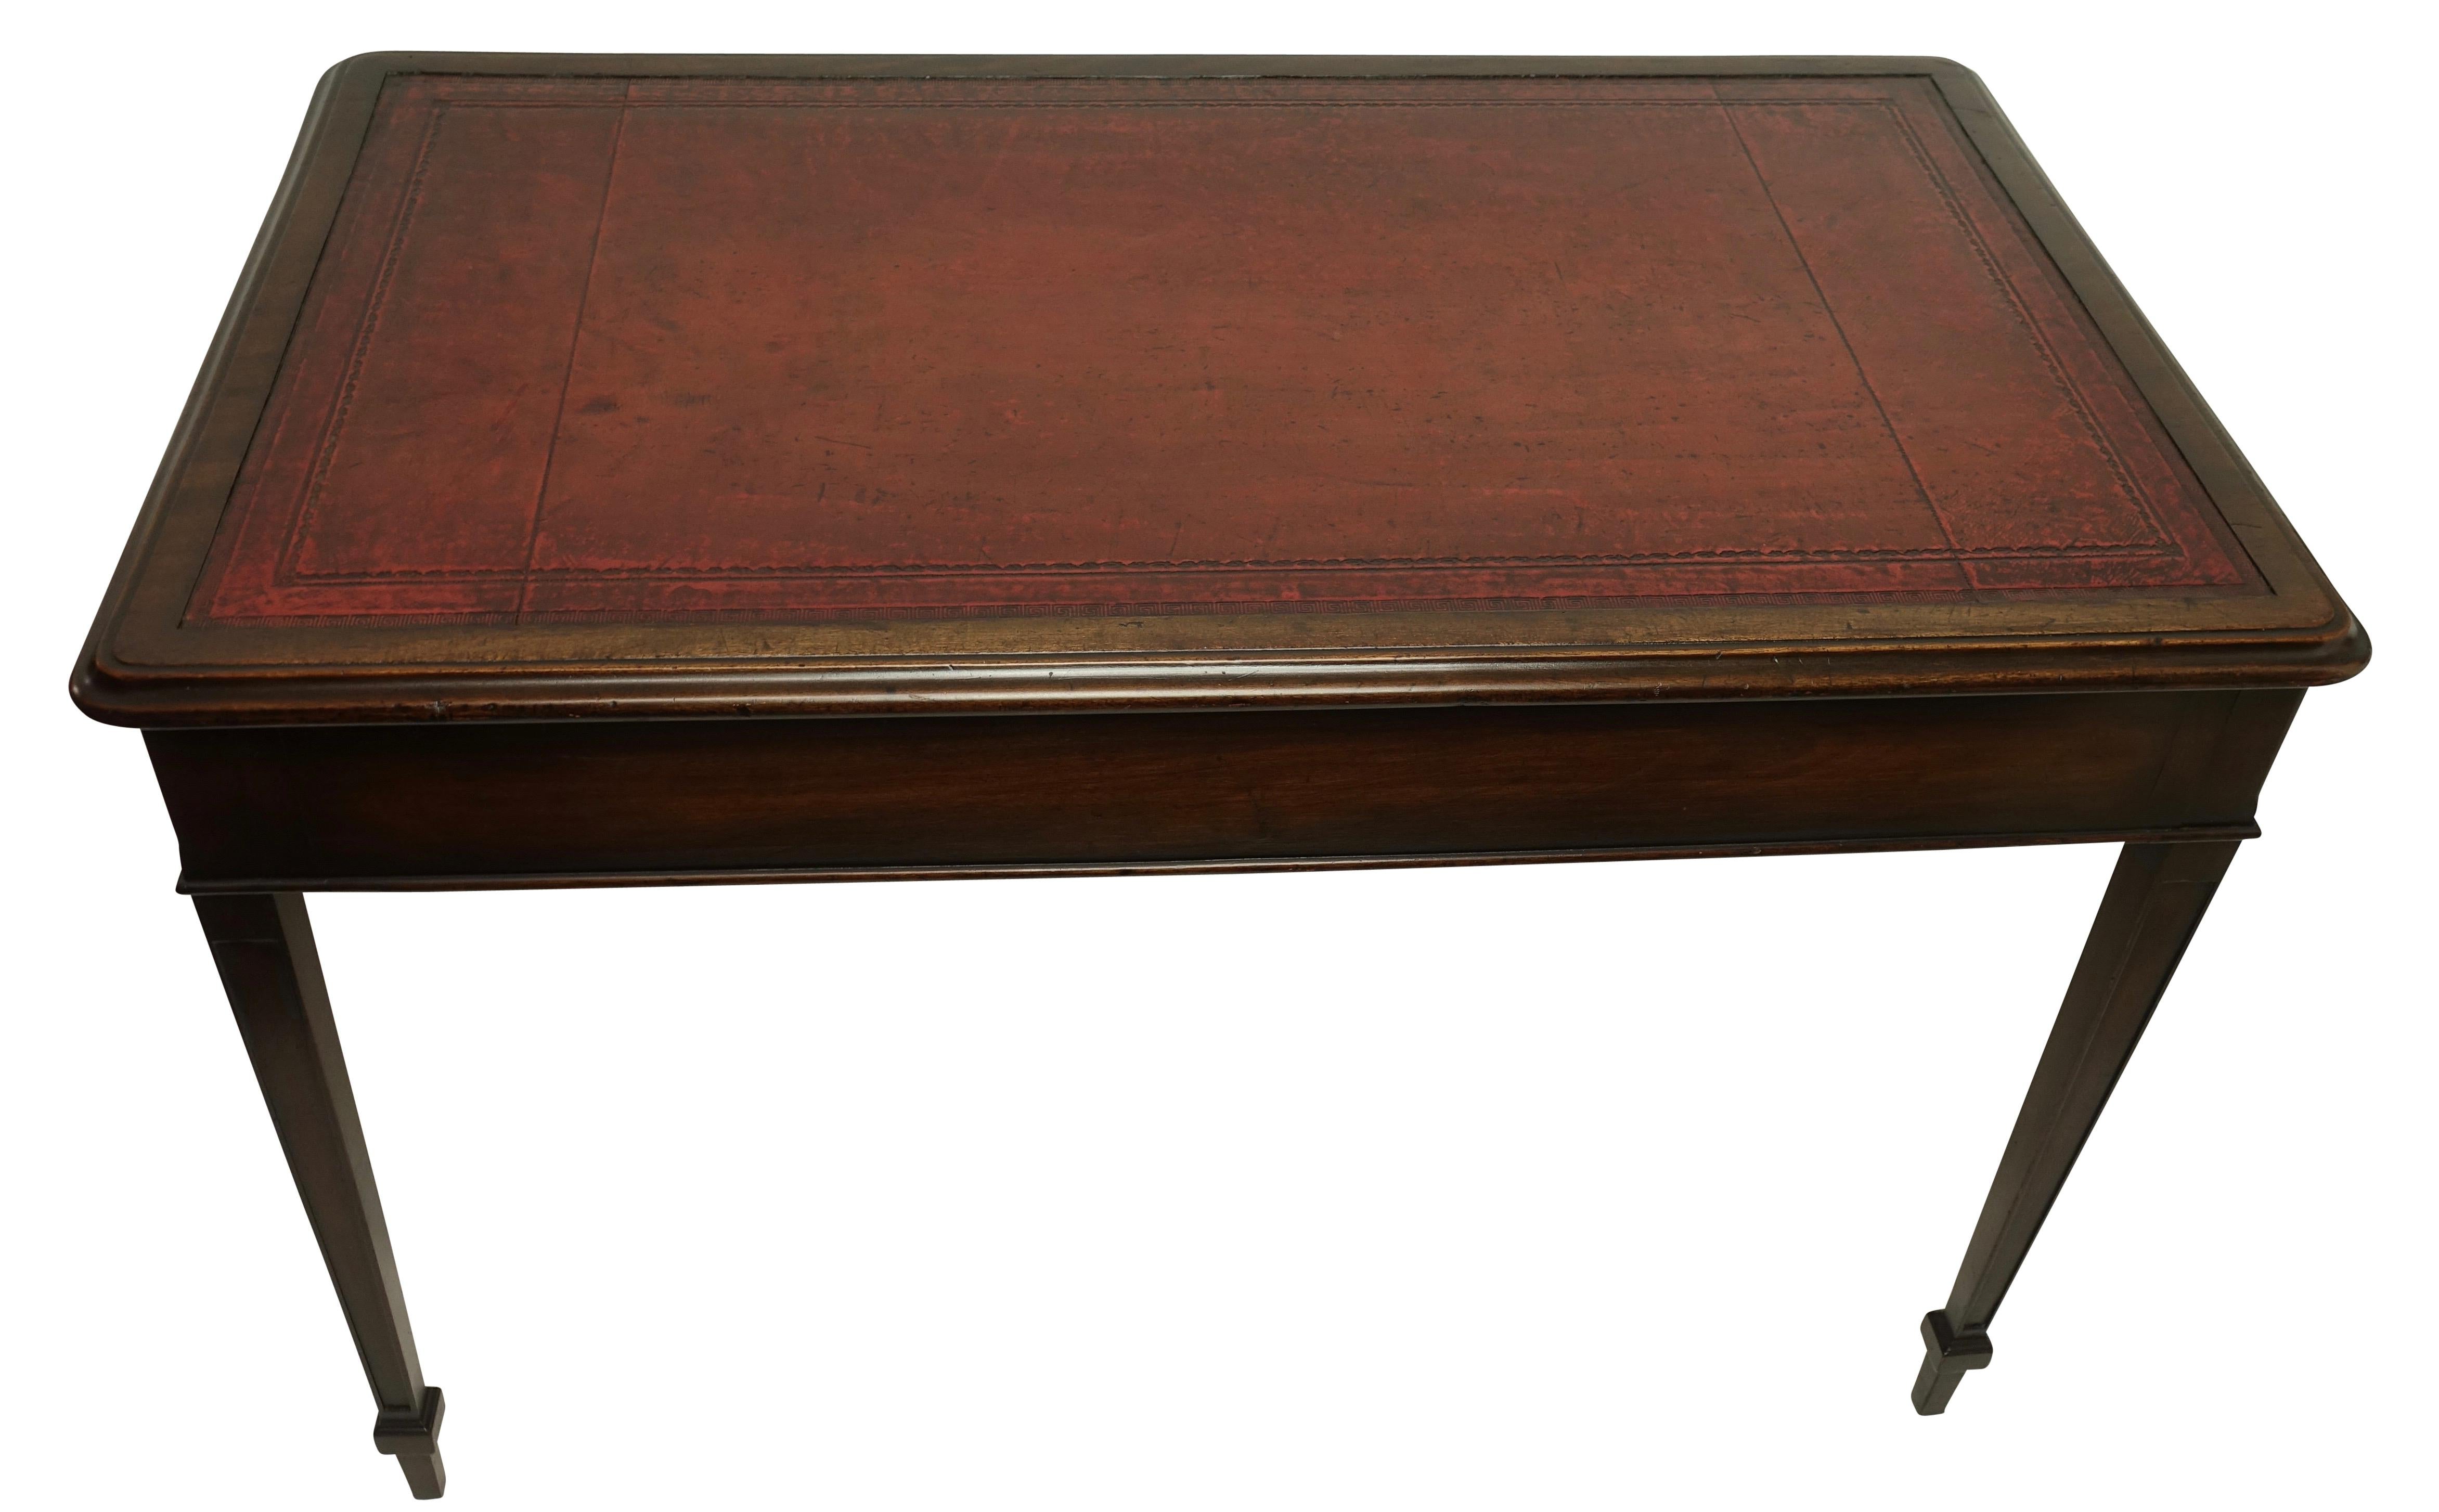 Mahogany Writing Table Desk with Red Leather Top, English, circa 1830 2